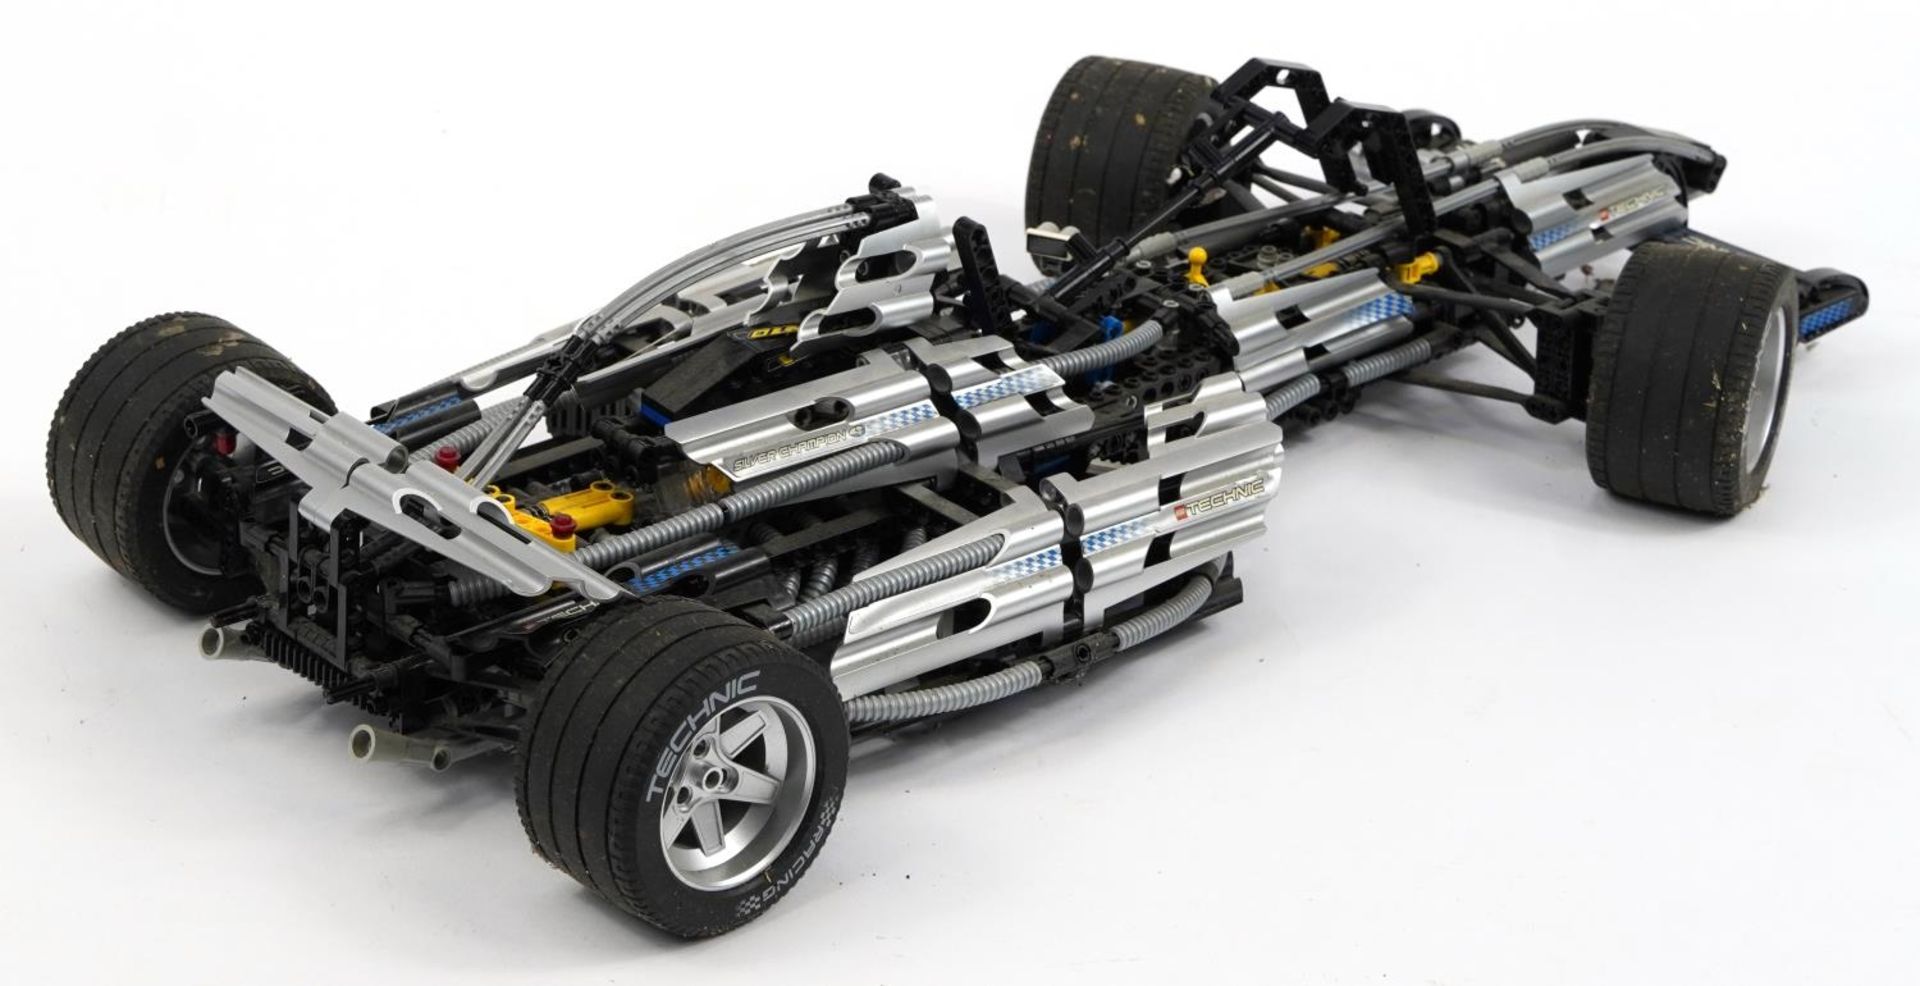 Vintage Lego Technic Silver Champion car with box and instructions, number 8458 - Image 3 of 4